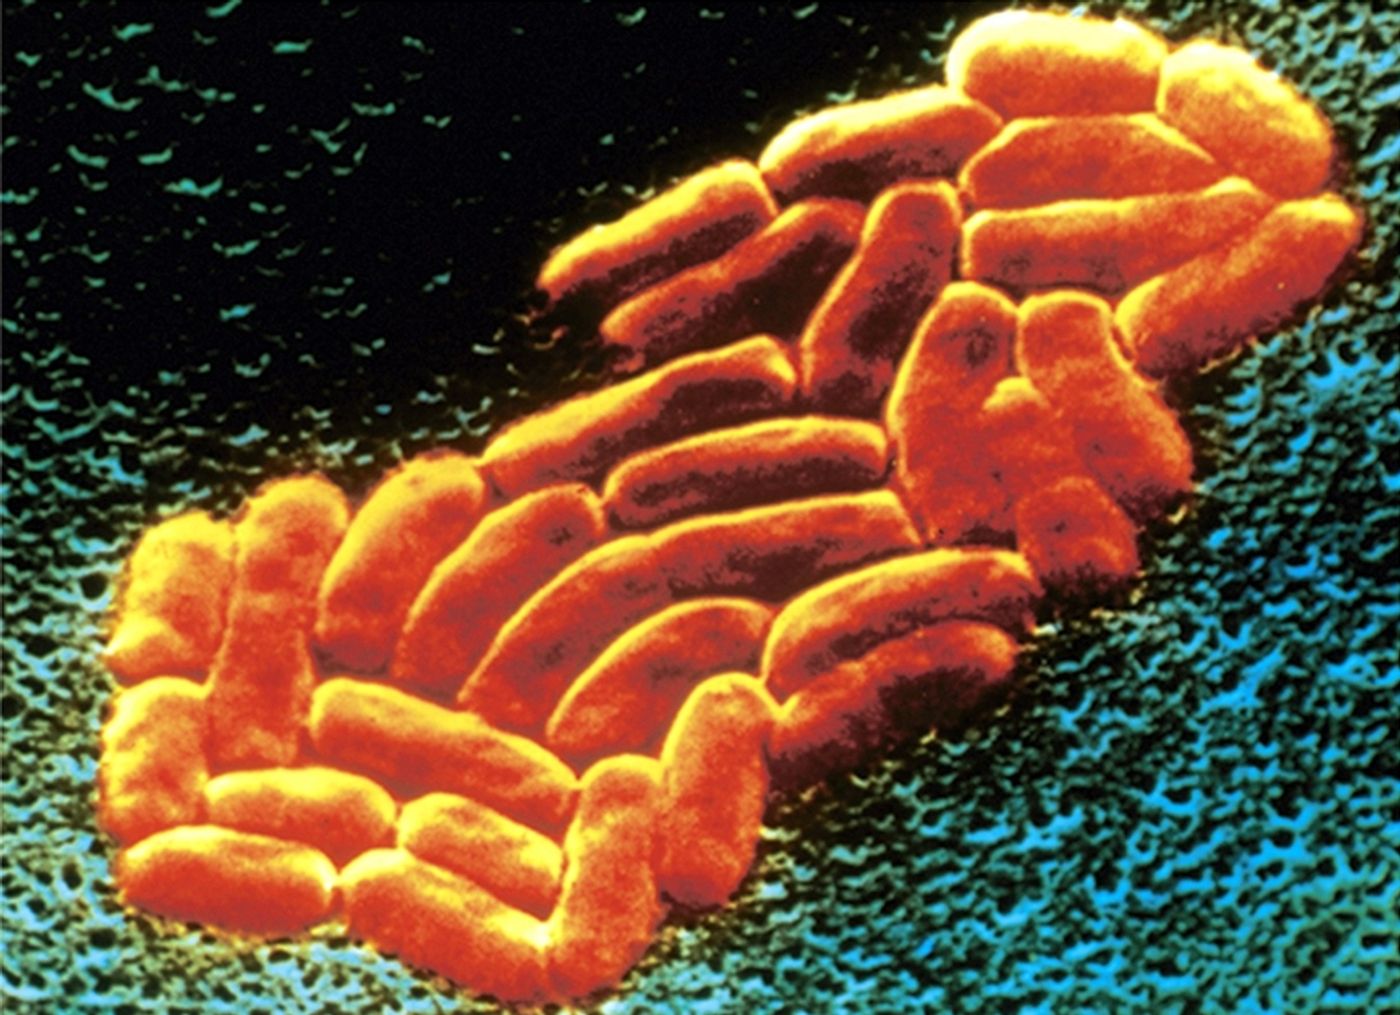 K. pneumoniae causes hospital-acquired infections.